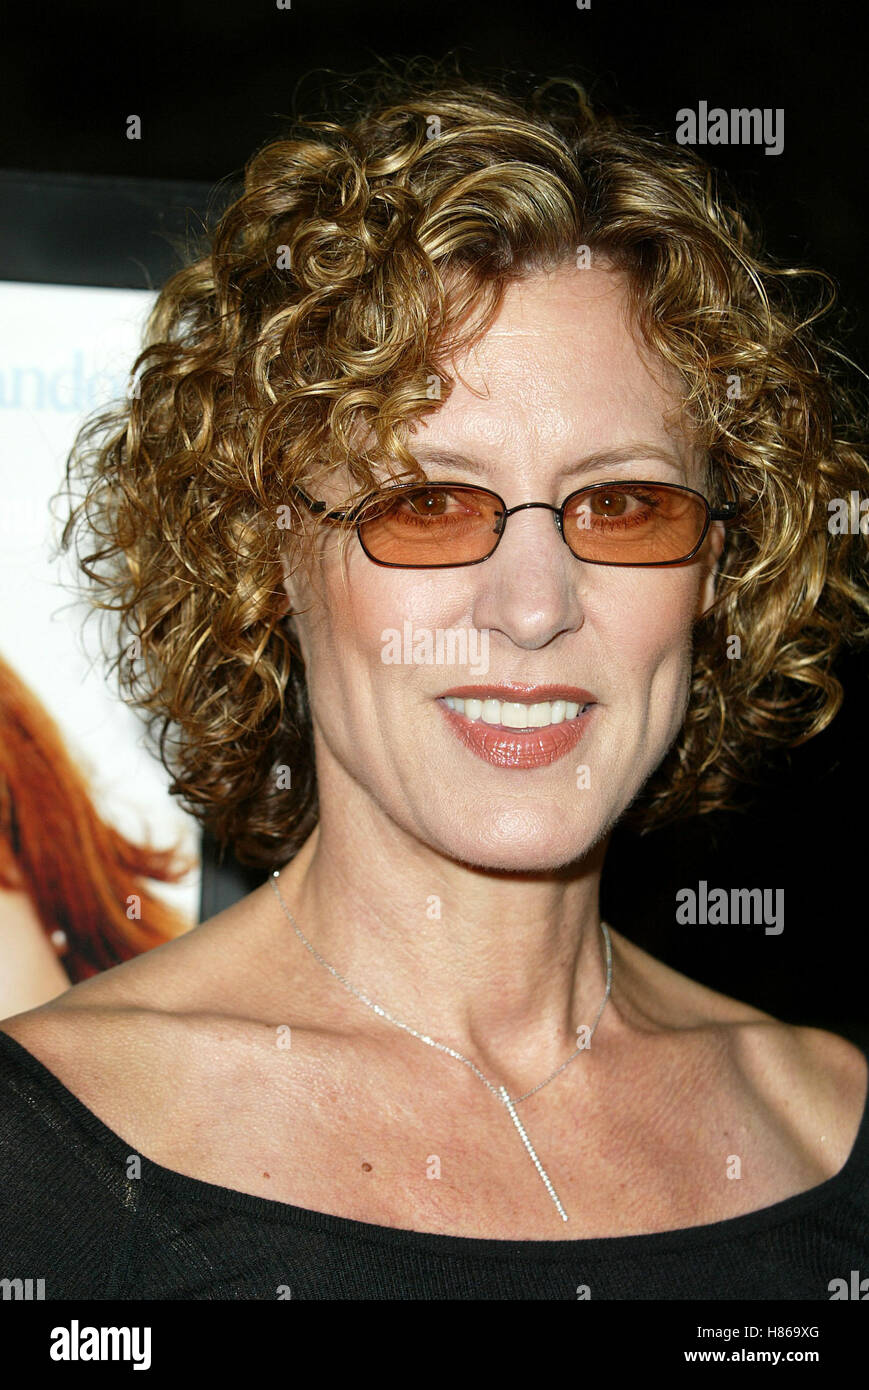 CHRISTINE LAHTI THE BANGERS SISTERS. PREMIERE THE GROVE LOS ANGELES USA 19 September 2002 Stock Photo